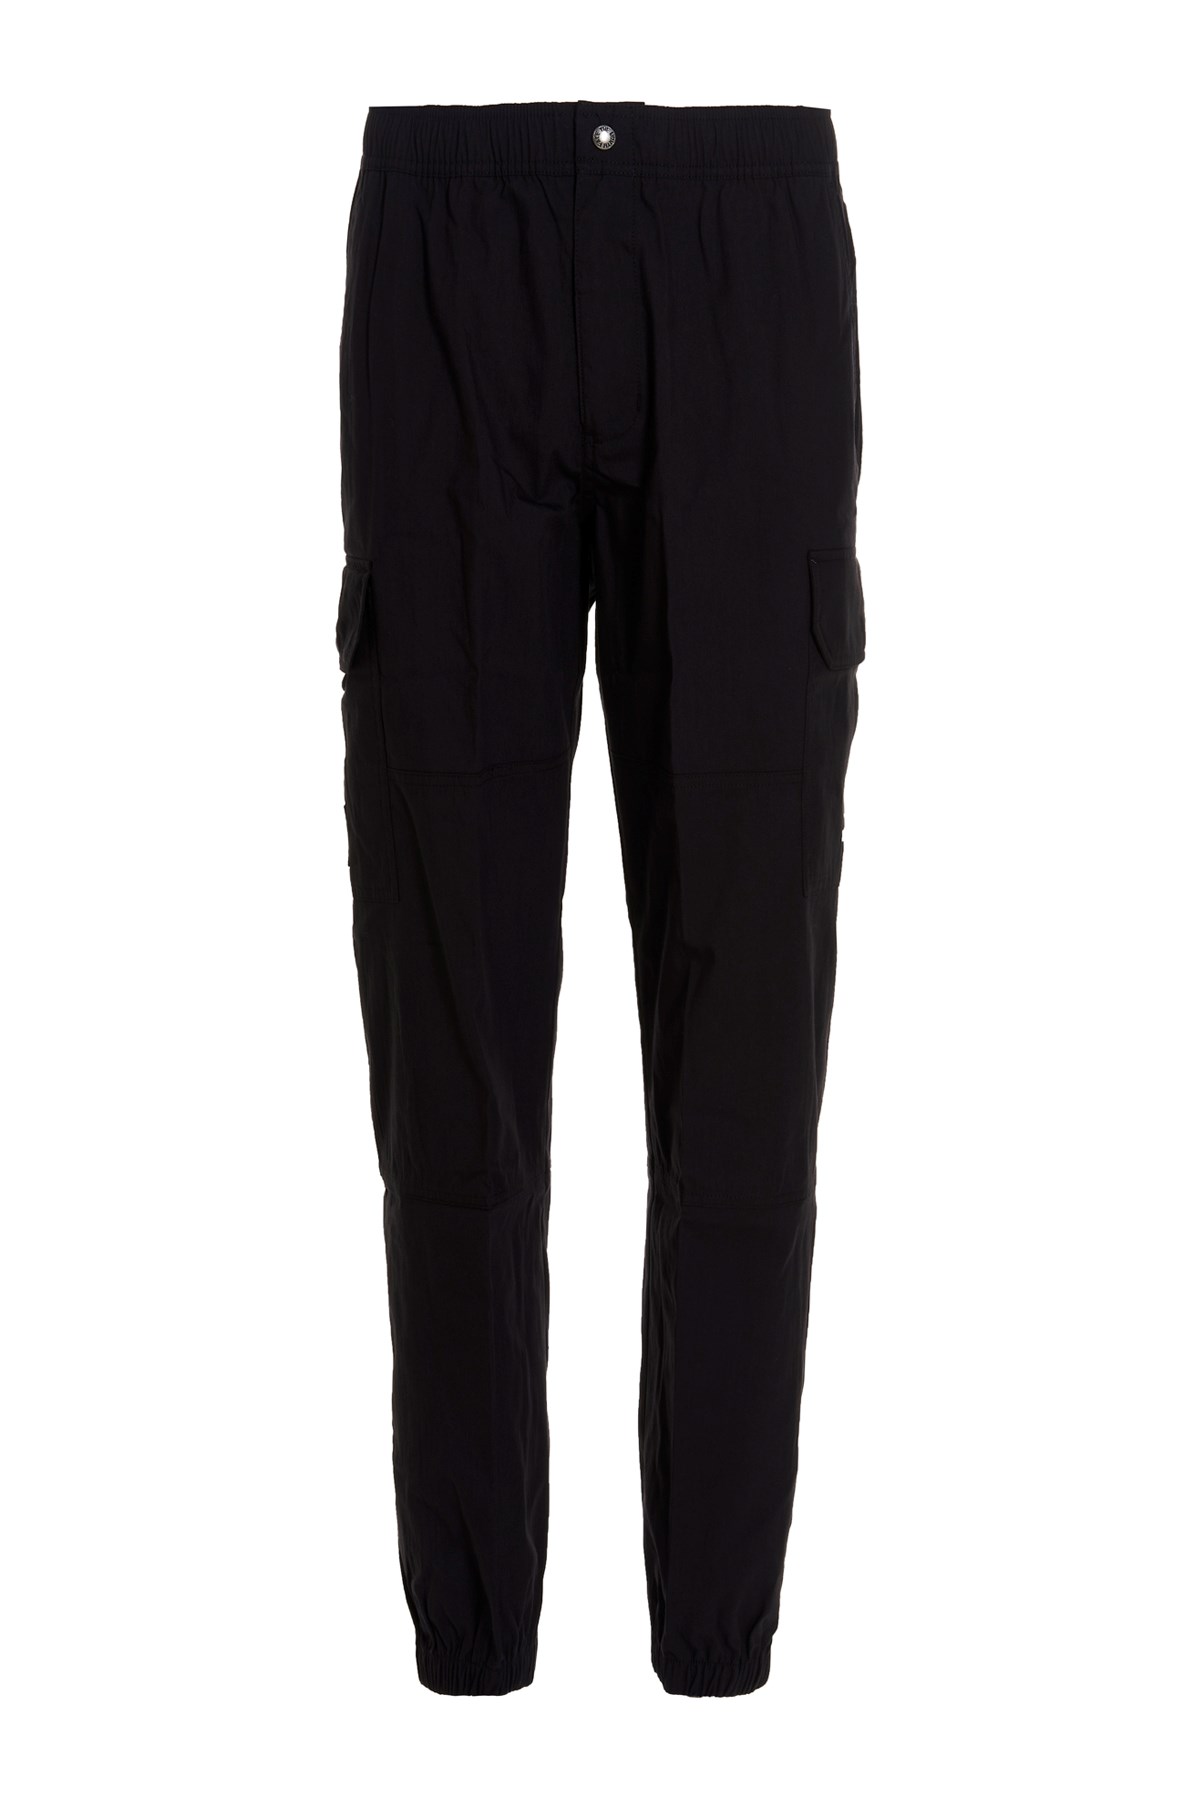 THE NORTH FACE Condrads Capsule Trousers